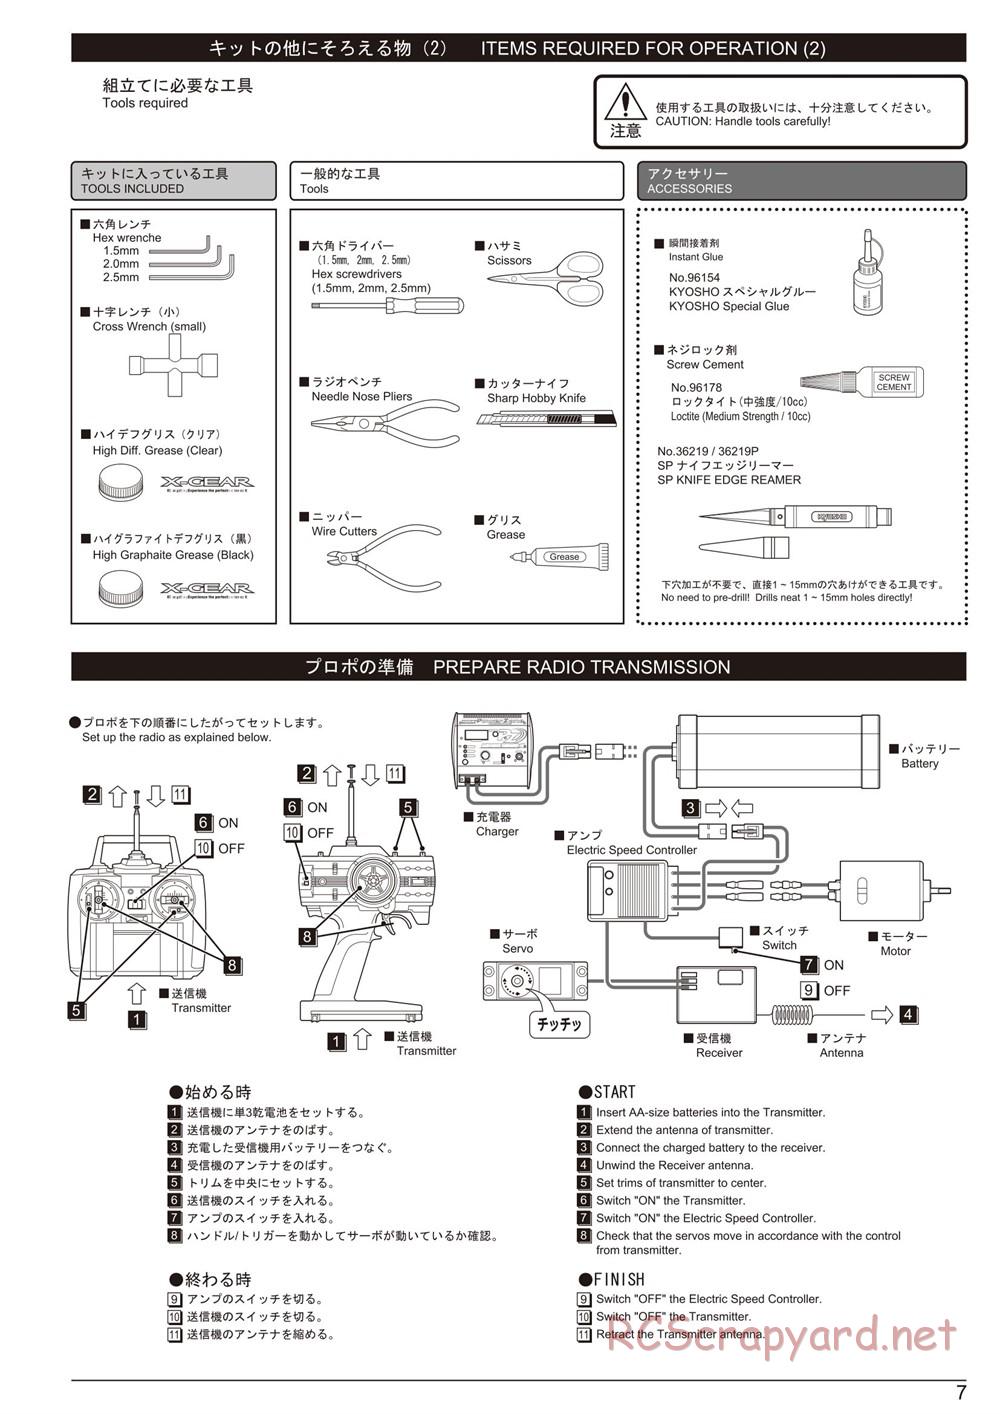 Kyosho - Ultima RB6.6 - Manual - Page 7